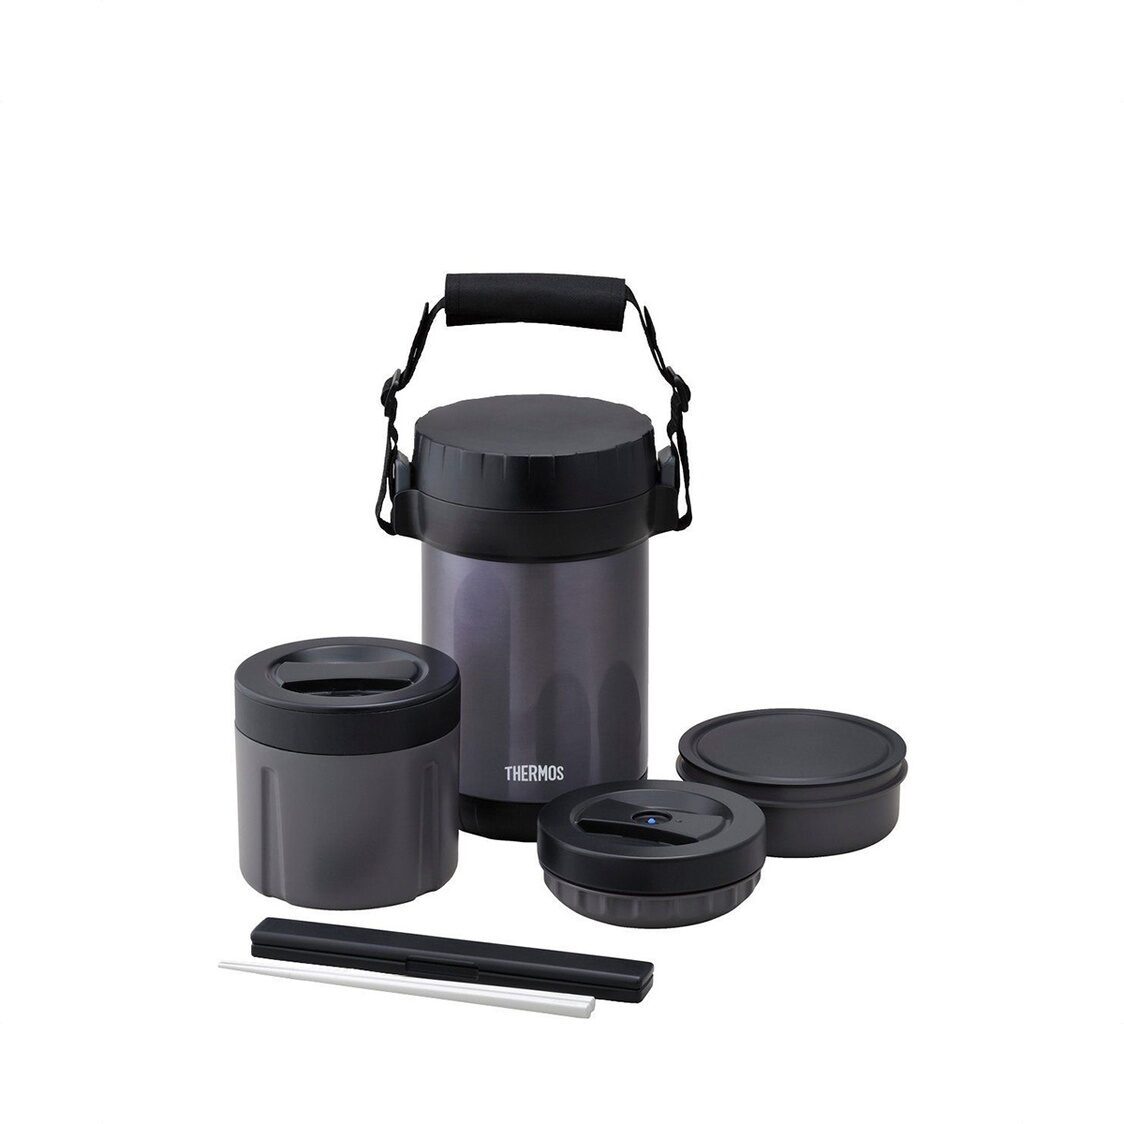 Thermos Lunch Tote Model JBG-2000